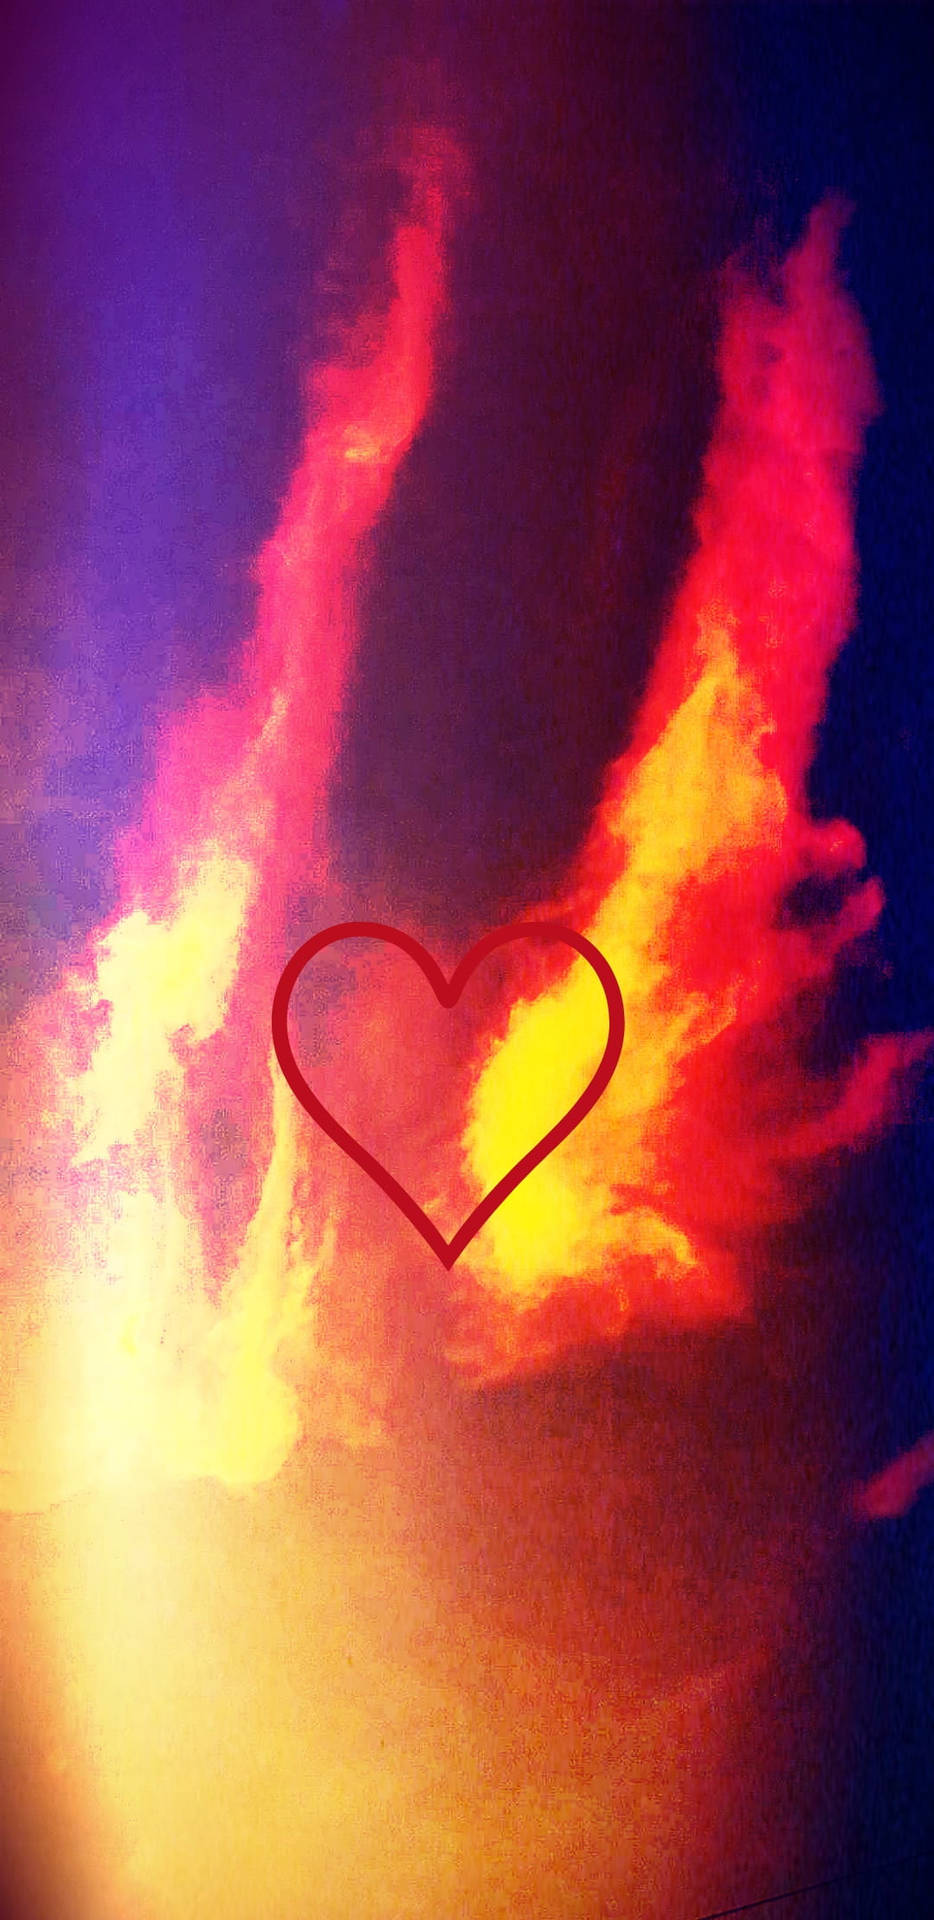 Dramatic Aesthetic Heart With Flames Background